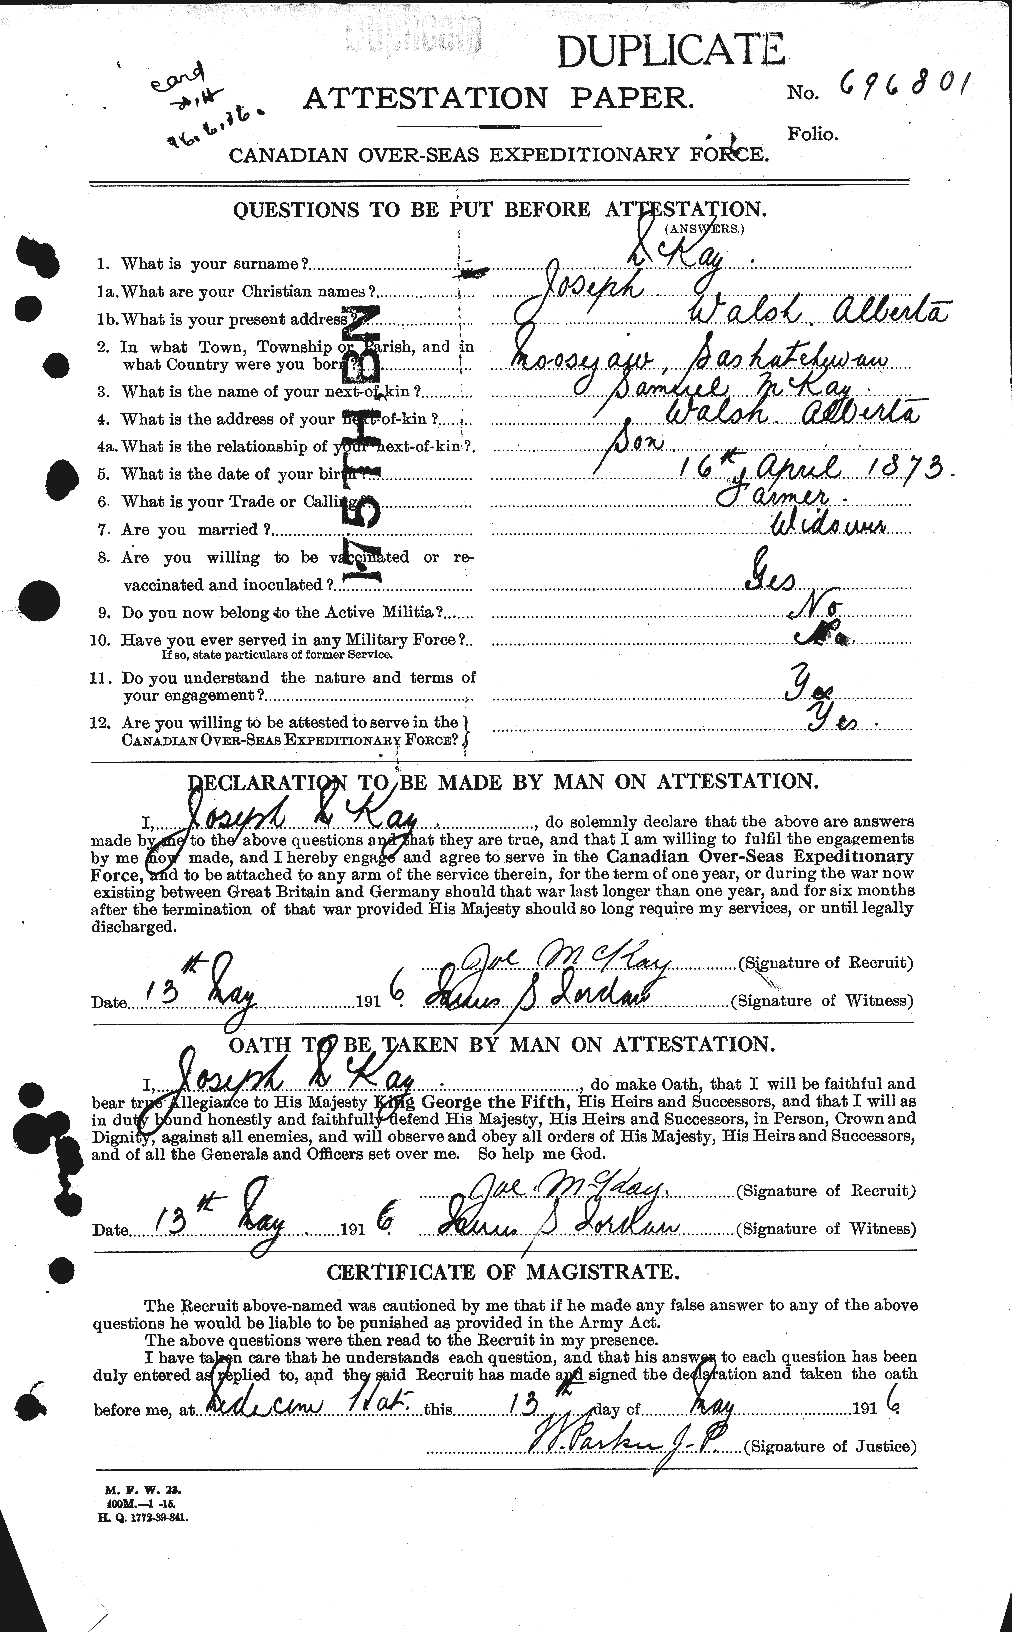 Personnel Records of the First World War - CEF 527109a